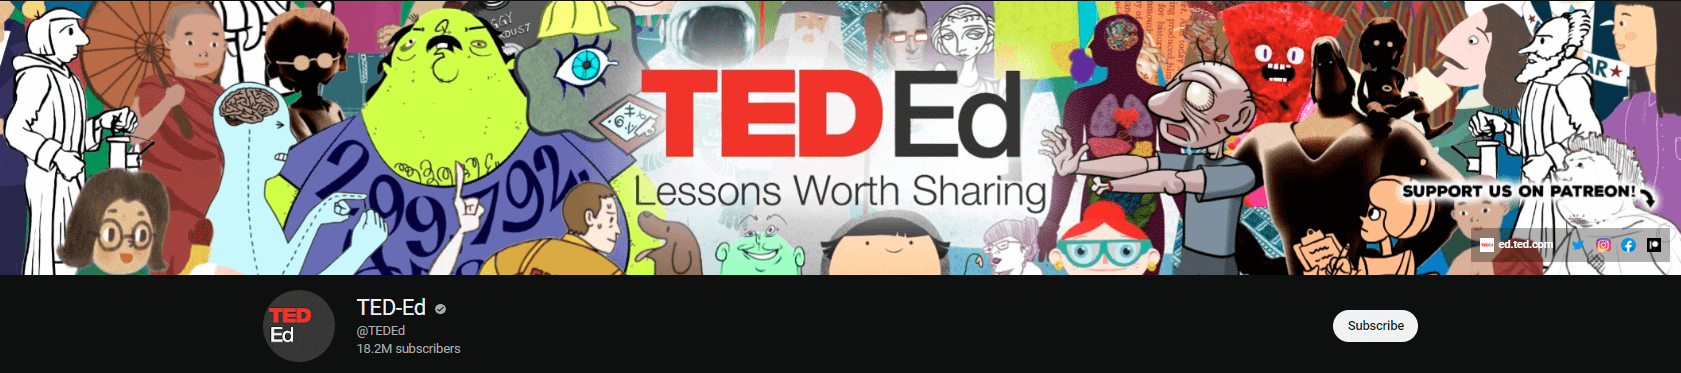 TED-ED educational youtube channel